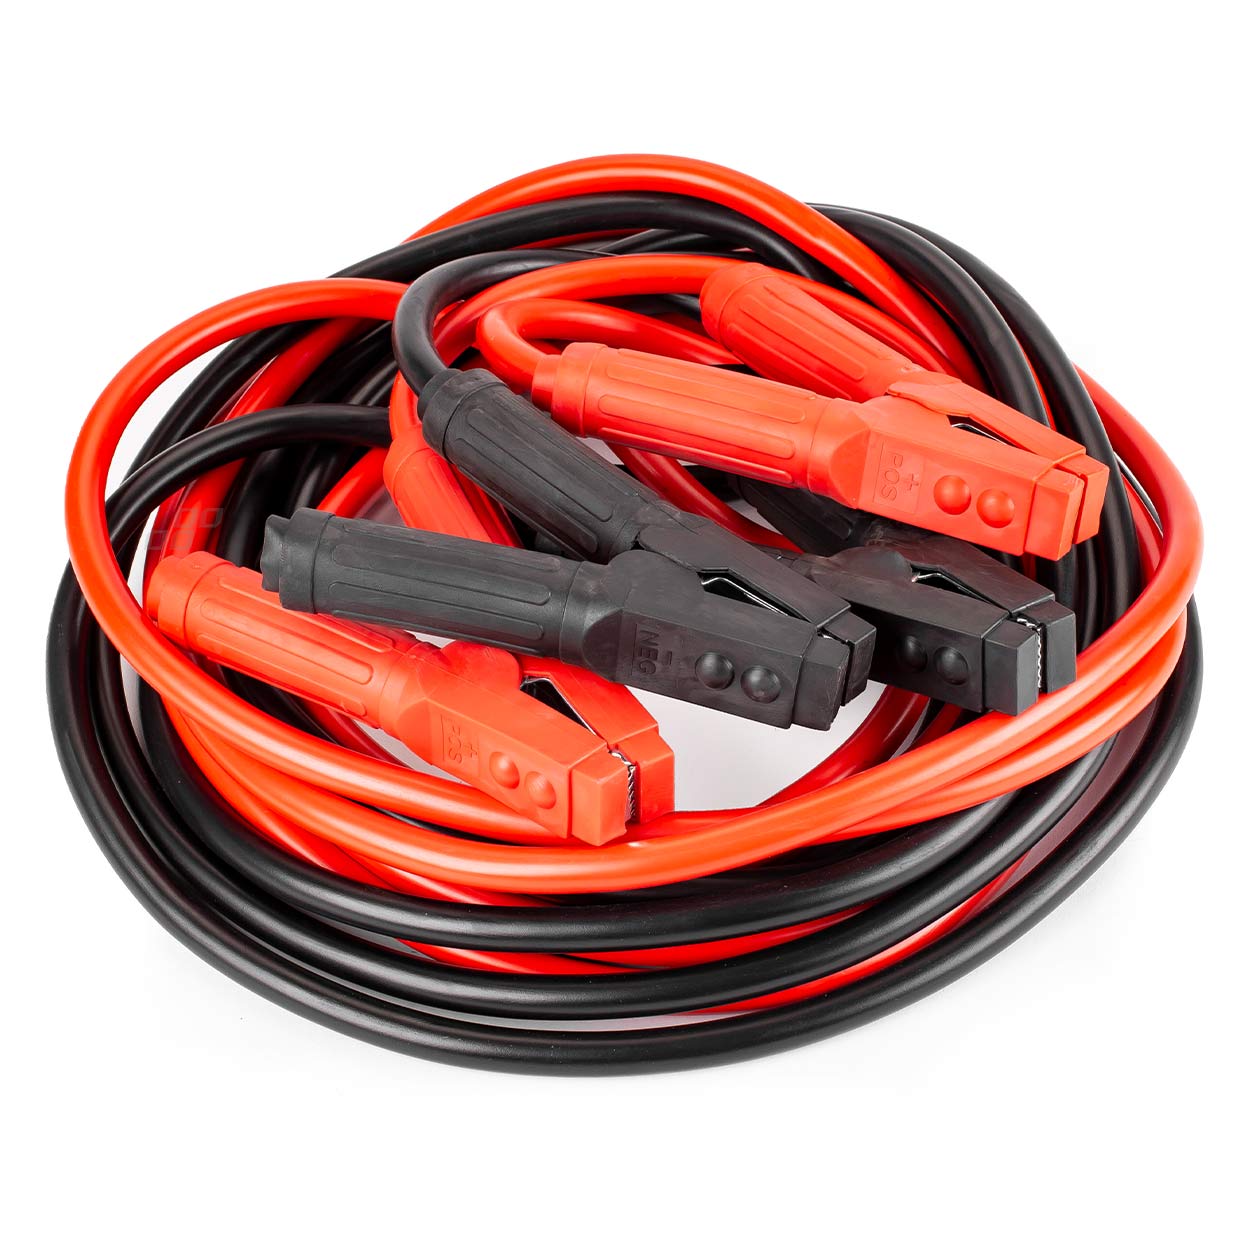 Booster cables 1800A - 6m